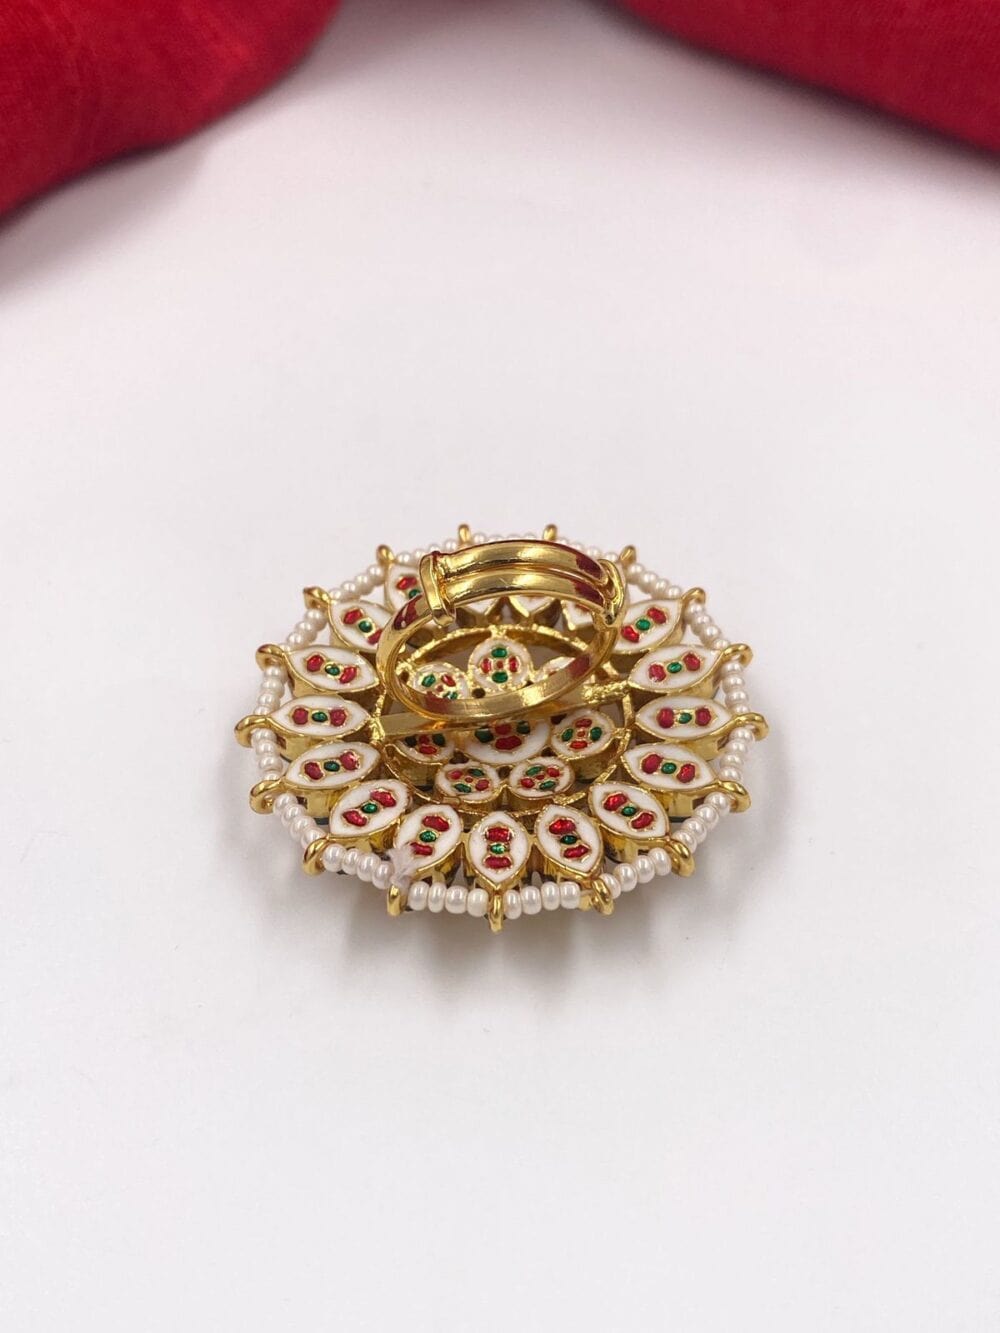 Gold Plated Adjustable Kundan Finger Ring For Ladies And Girls By Gehna Shop Finger rings